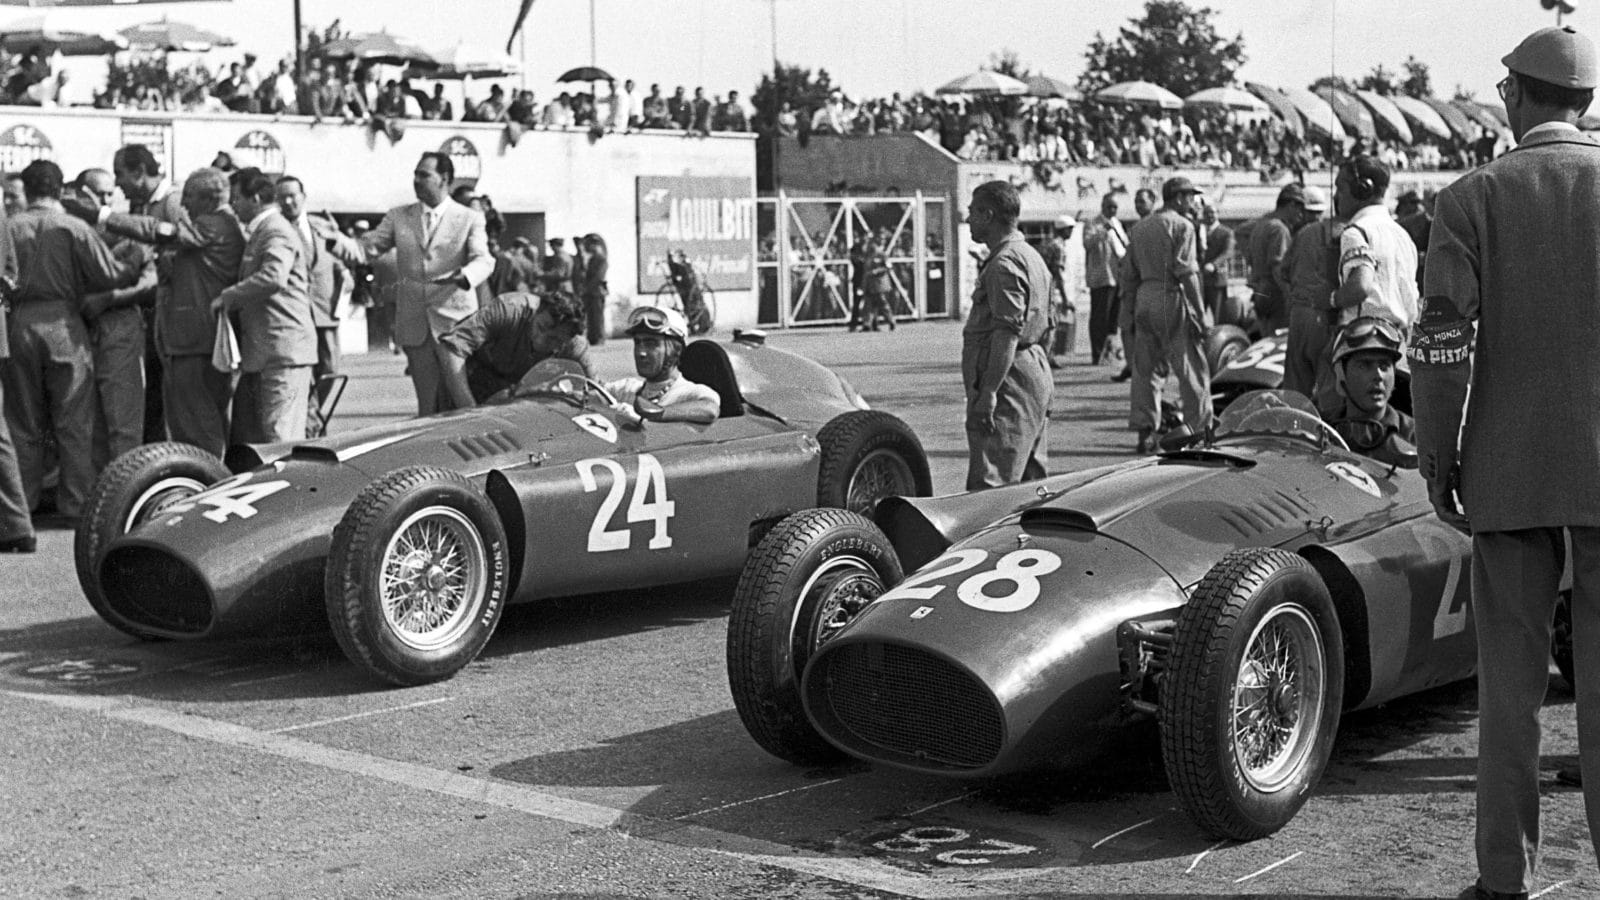 Eugenio-Castellotti-and-Luigi-Musso-on-the-grid-at-Monza